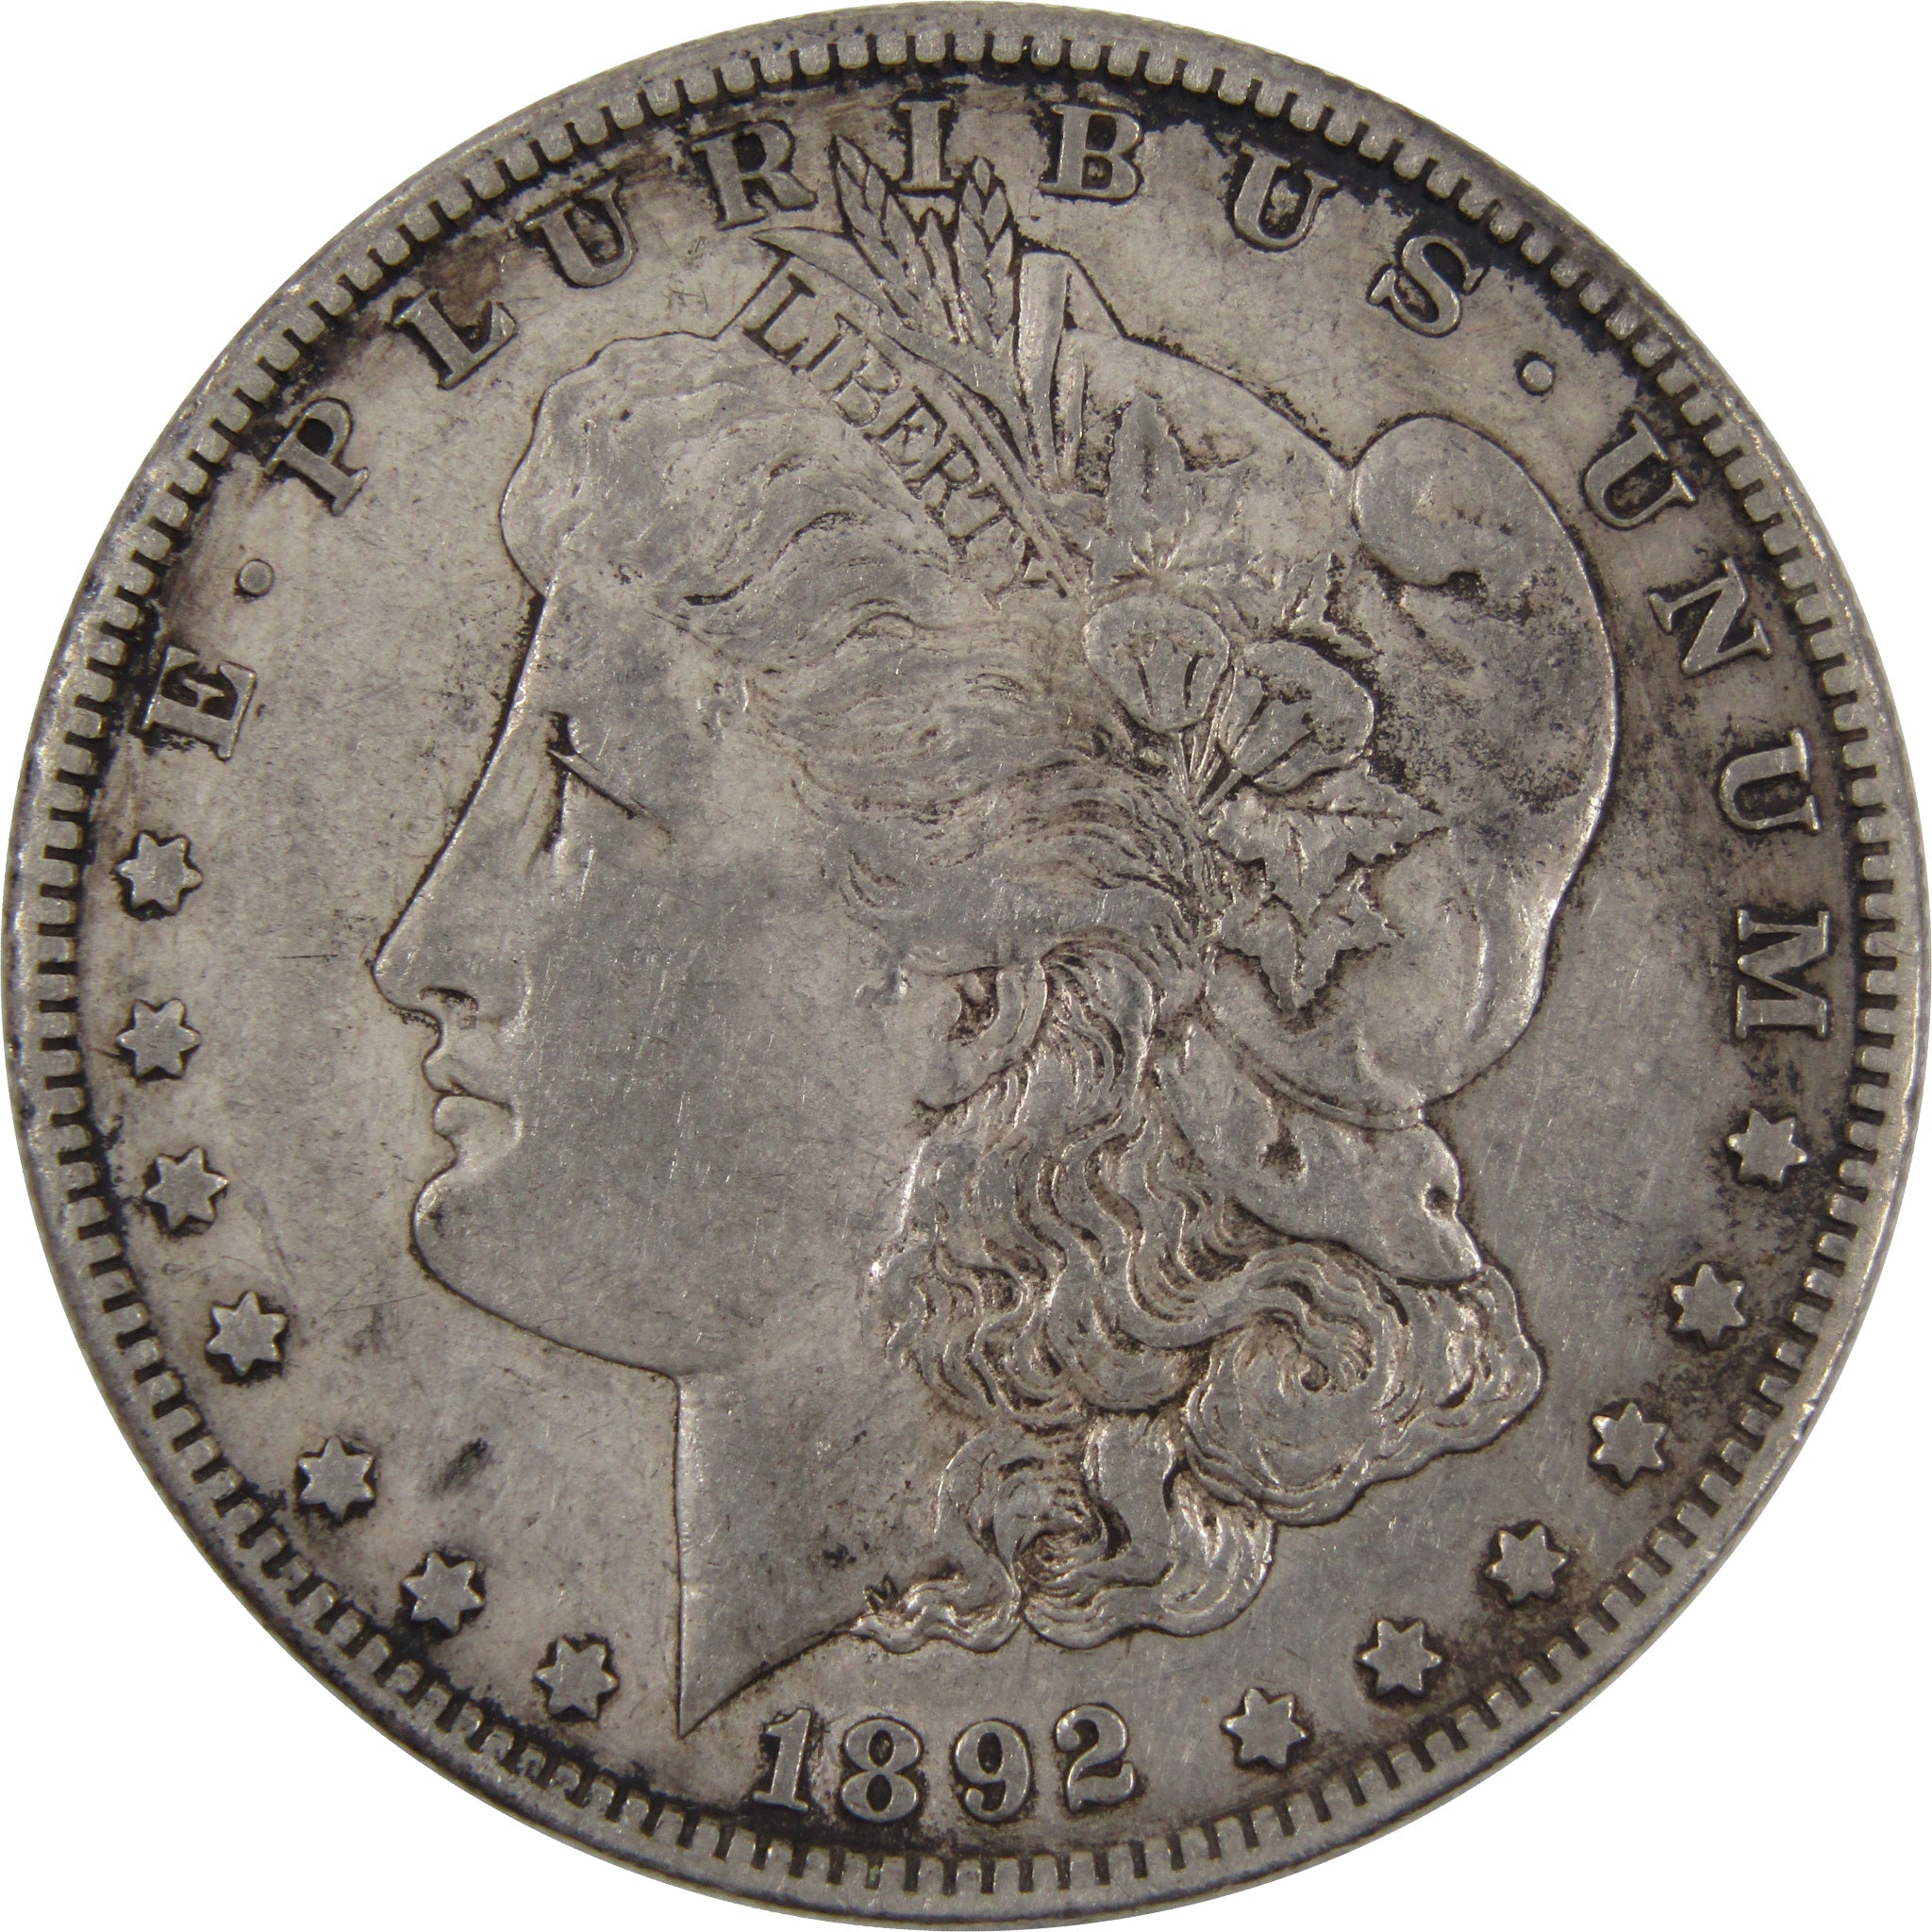 1892 S Morgan Dollar XF EF Extremely Fine Details 90% Silver SKU:I2444 - Morgan coin - Morgan silver dollar - Morgan silver dollar for sale - Profile Coins &amp; Collectibles